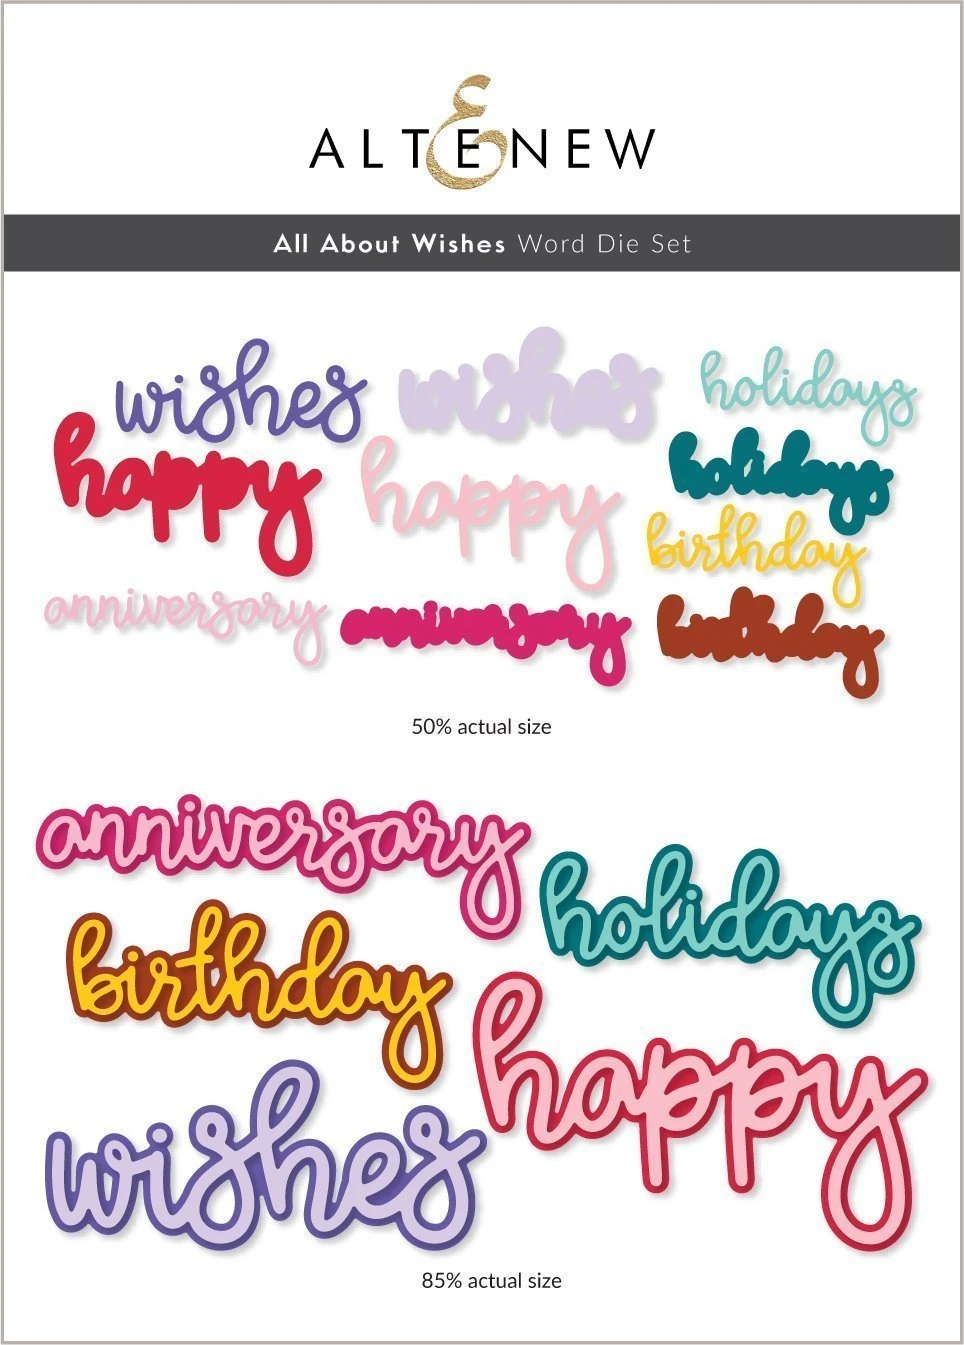 All About Wishes Word - Die Set